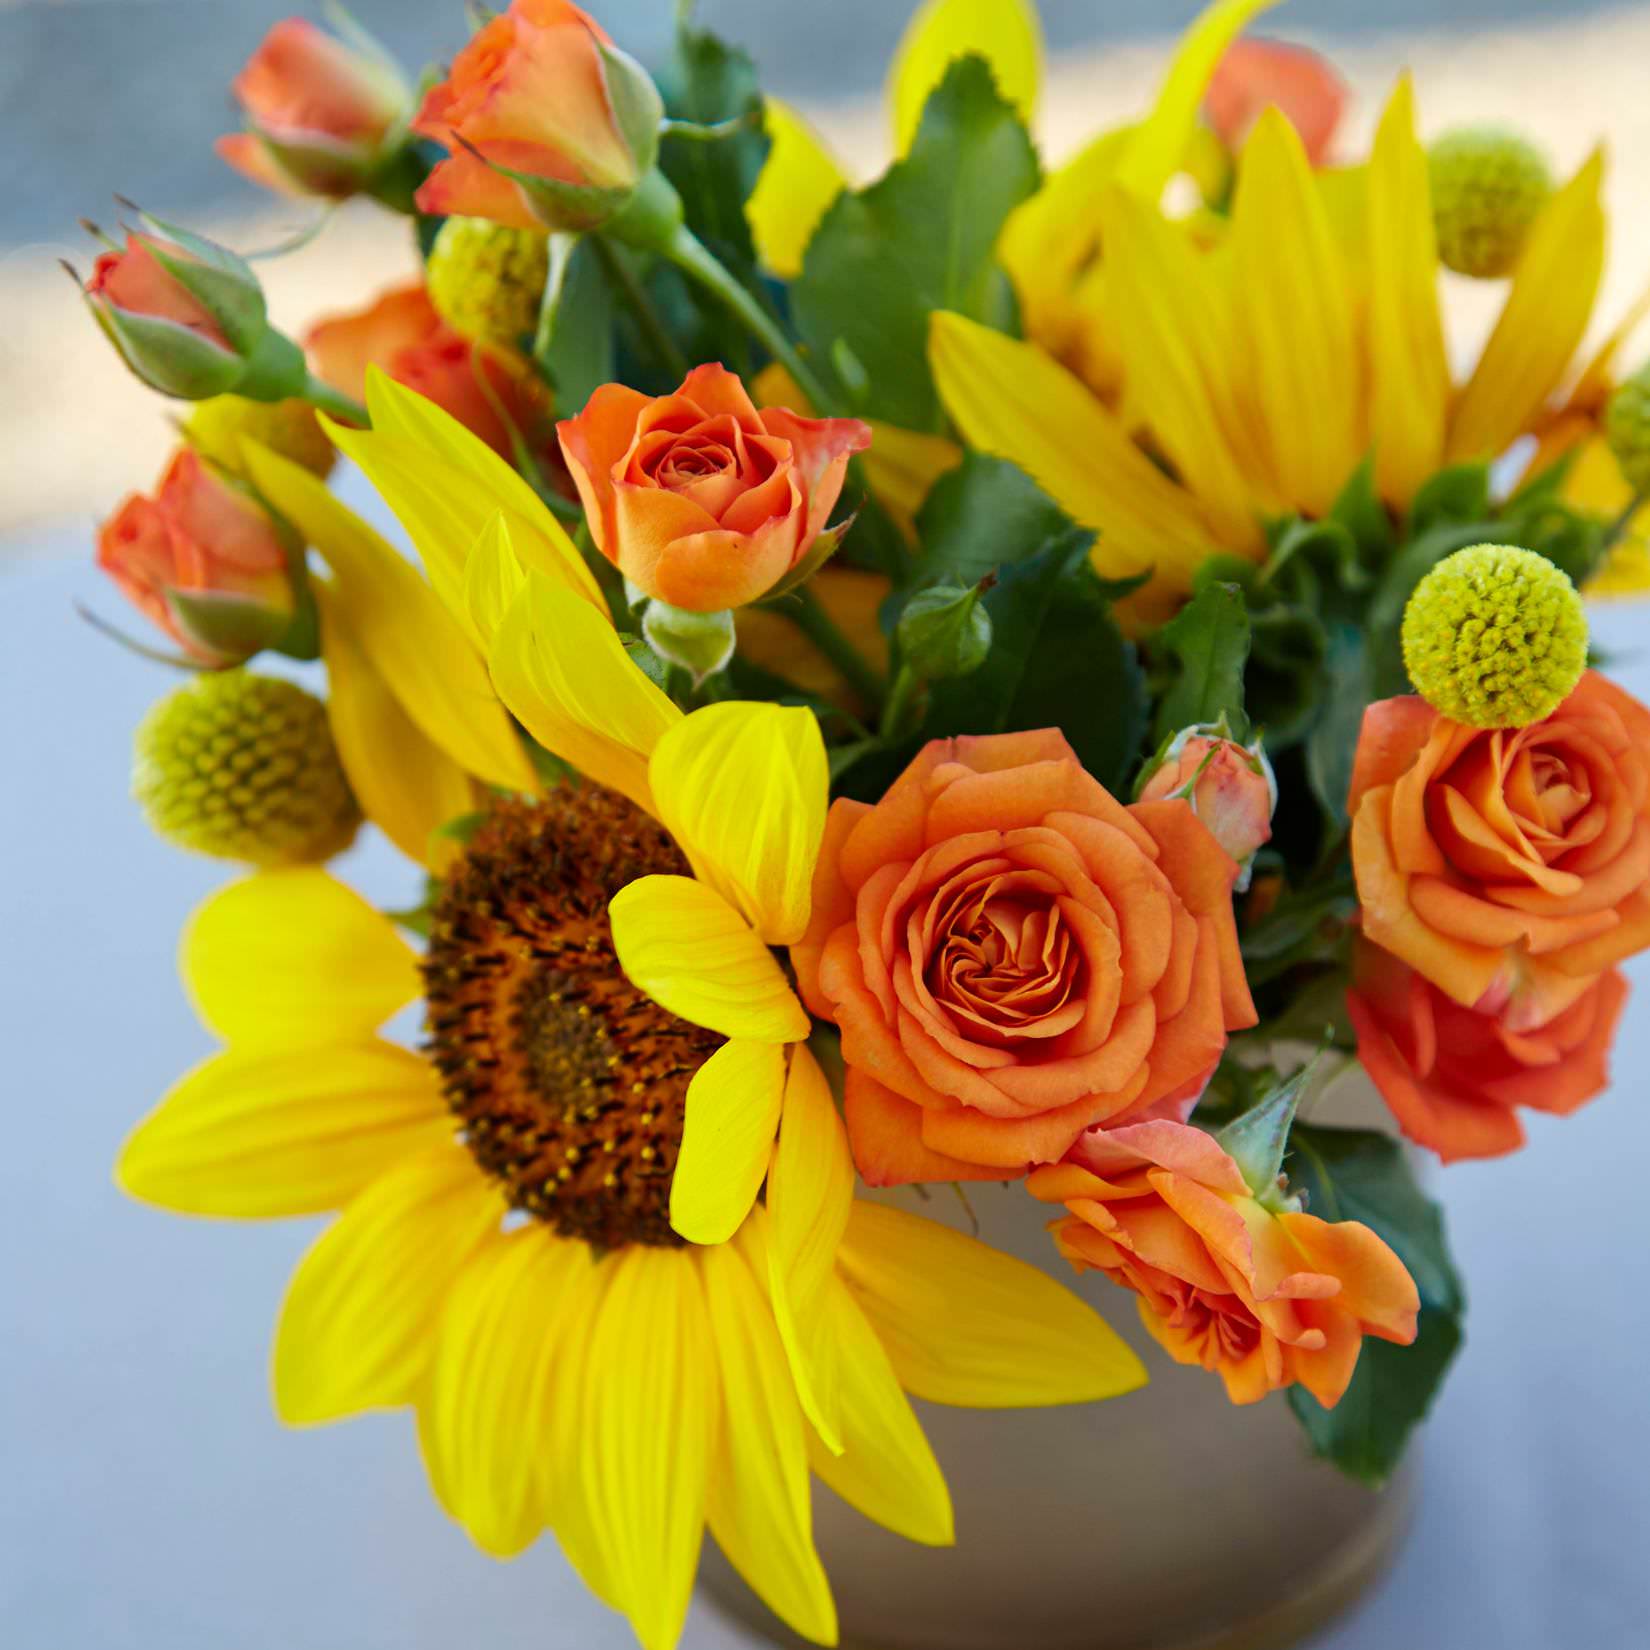 Floral centerpiece with sunflowers and orange spray roses